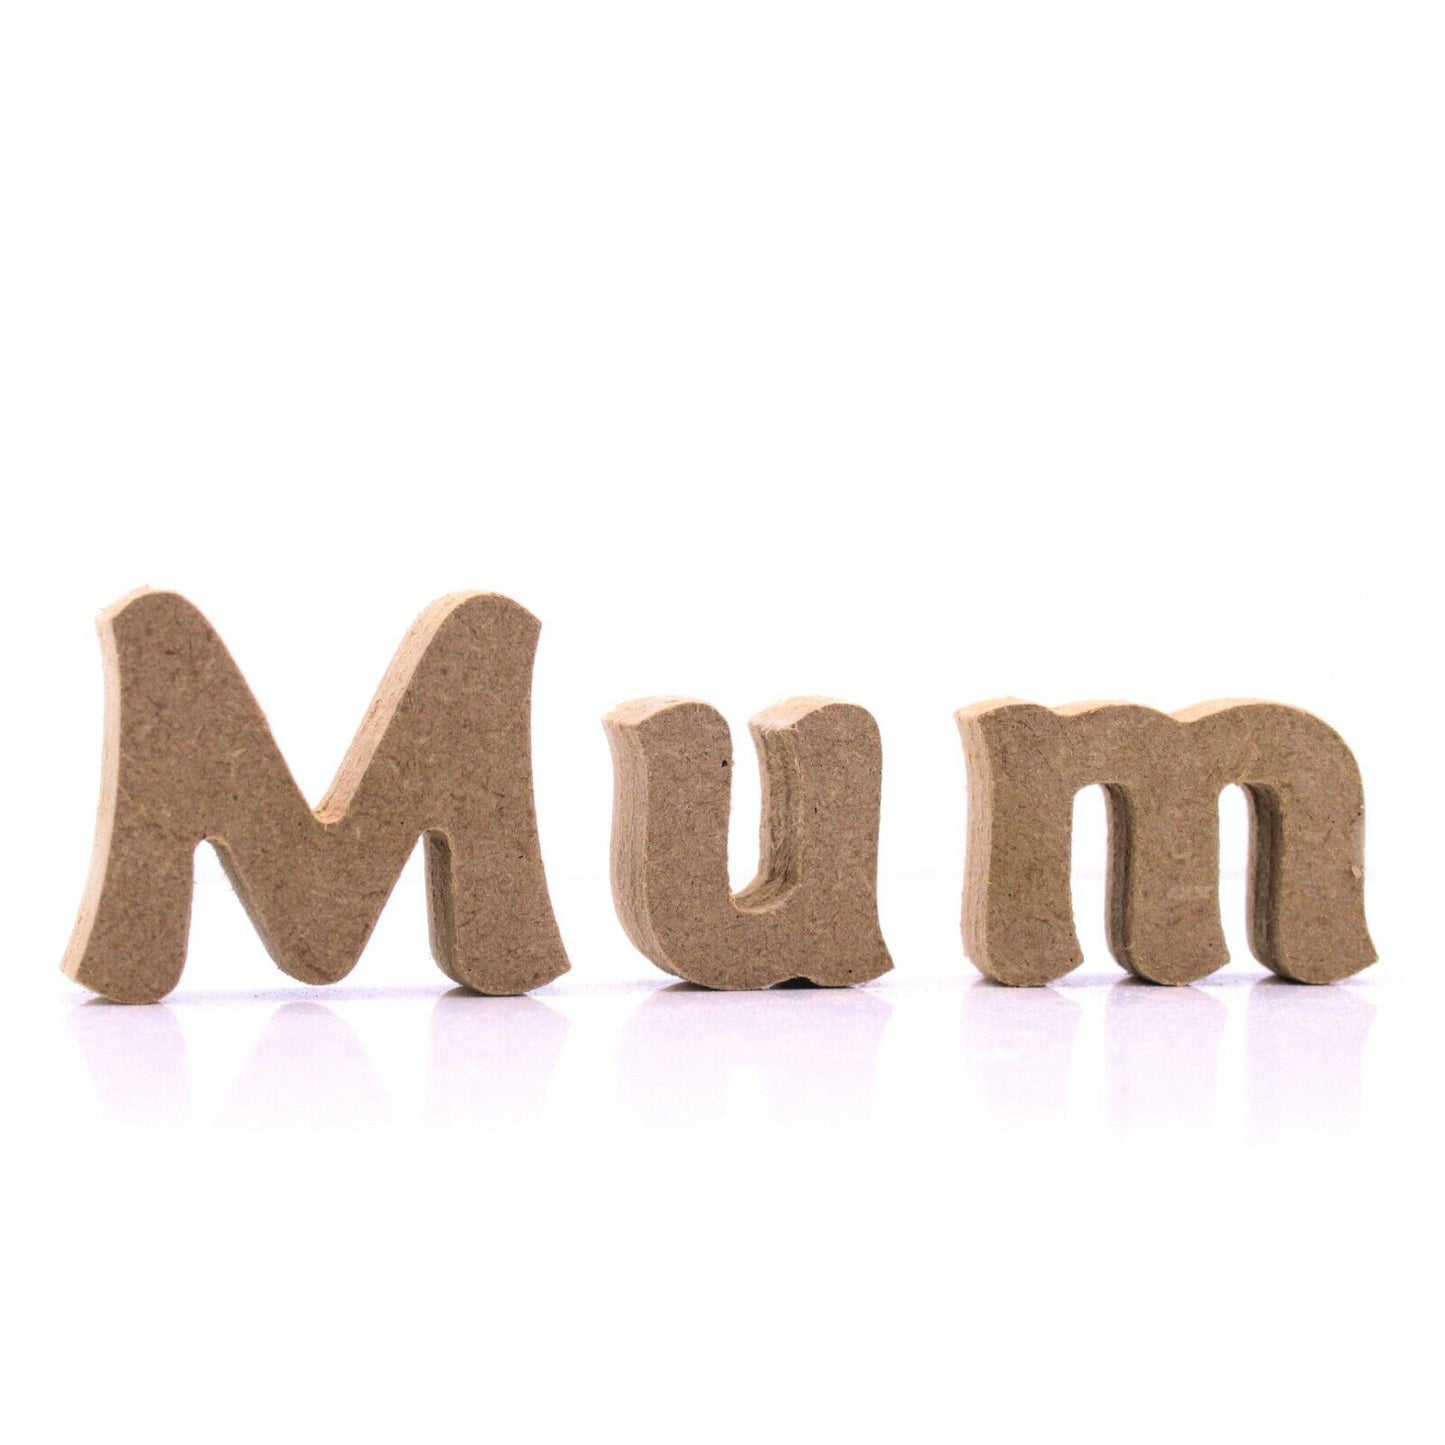 Free Standing Mum Word Kit With Paints and Brush. Paint your own mother's gift